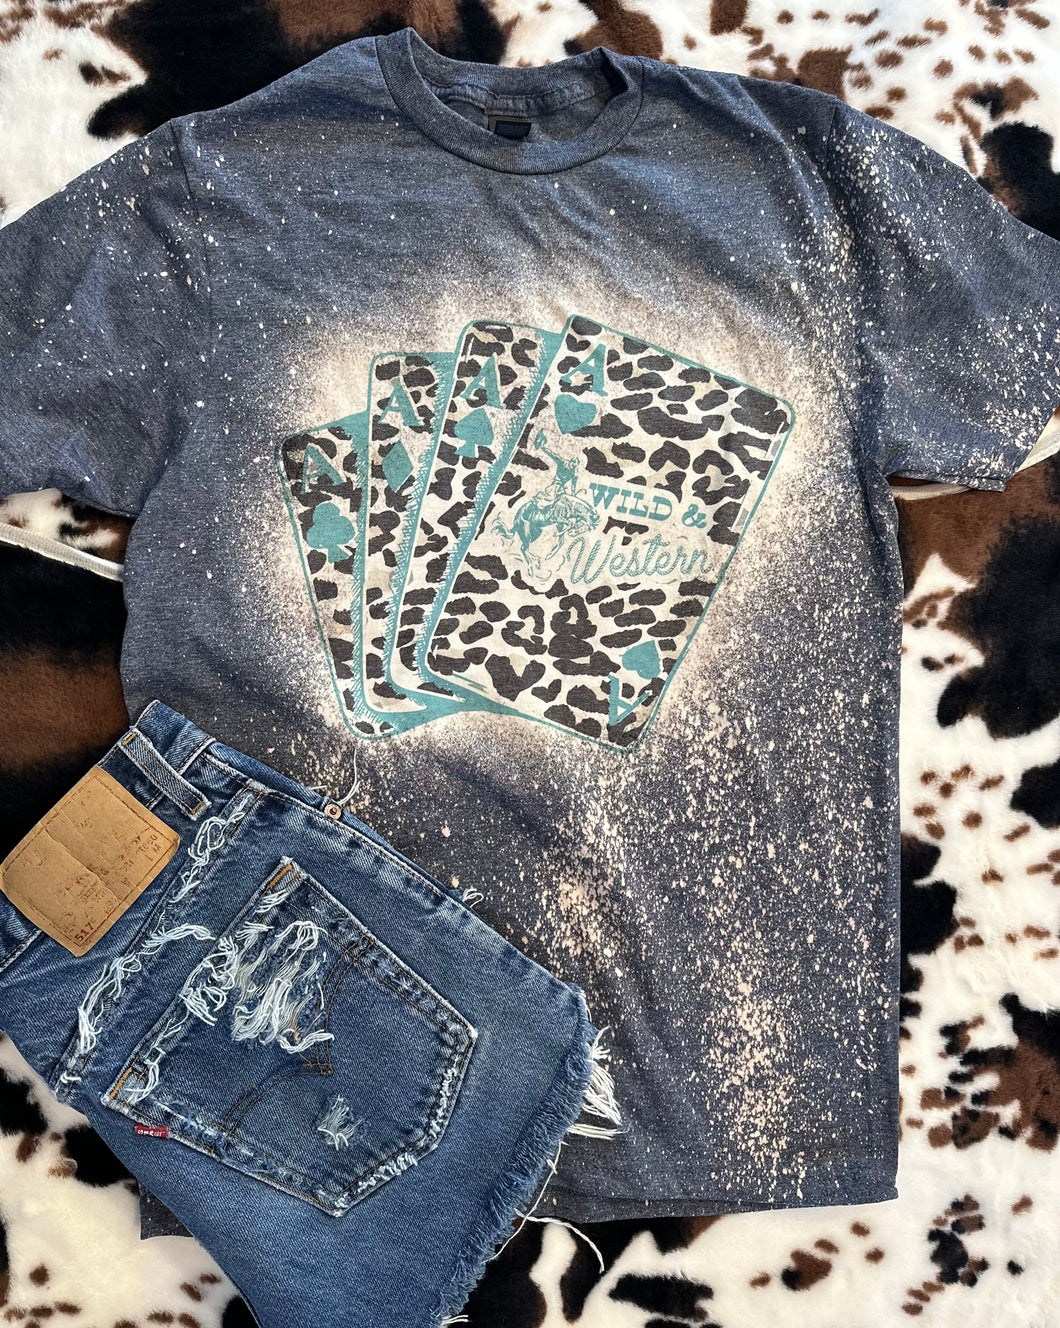 Bleached card of aces wild & western graphic tee or sweatshirt - Mavictoria Designs Hot Press Express